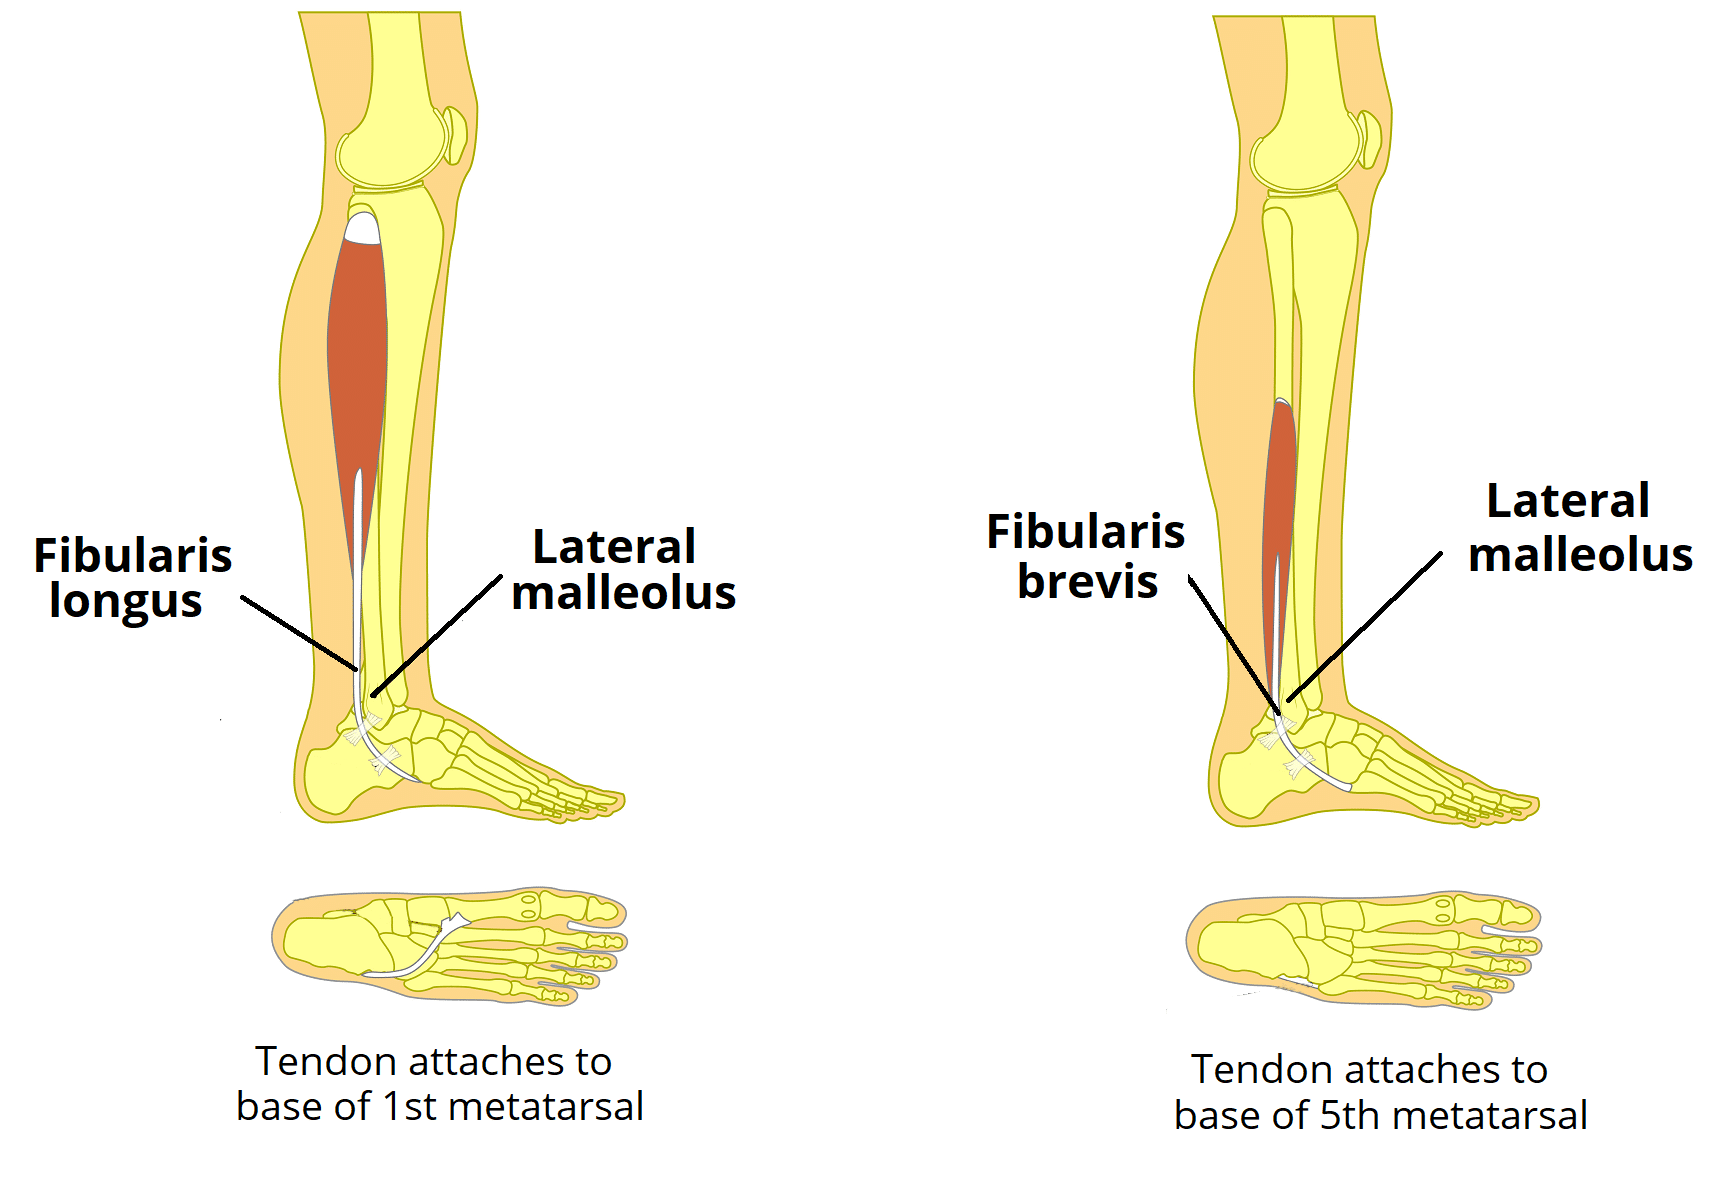 Calf - the lower part of your leg?